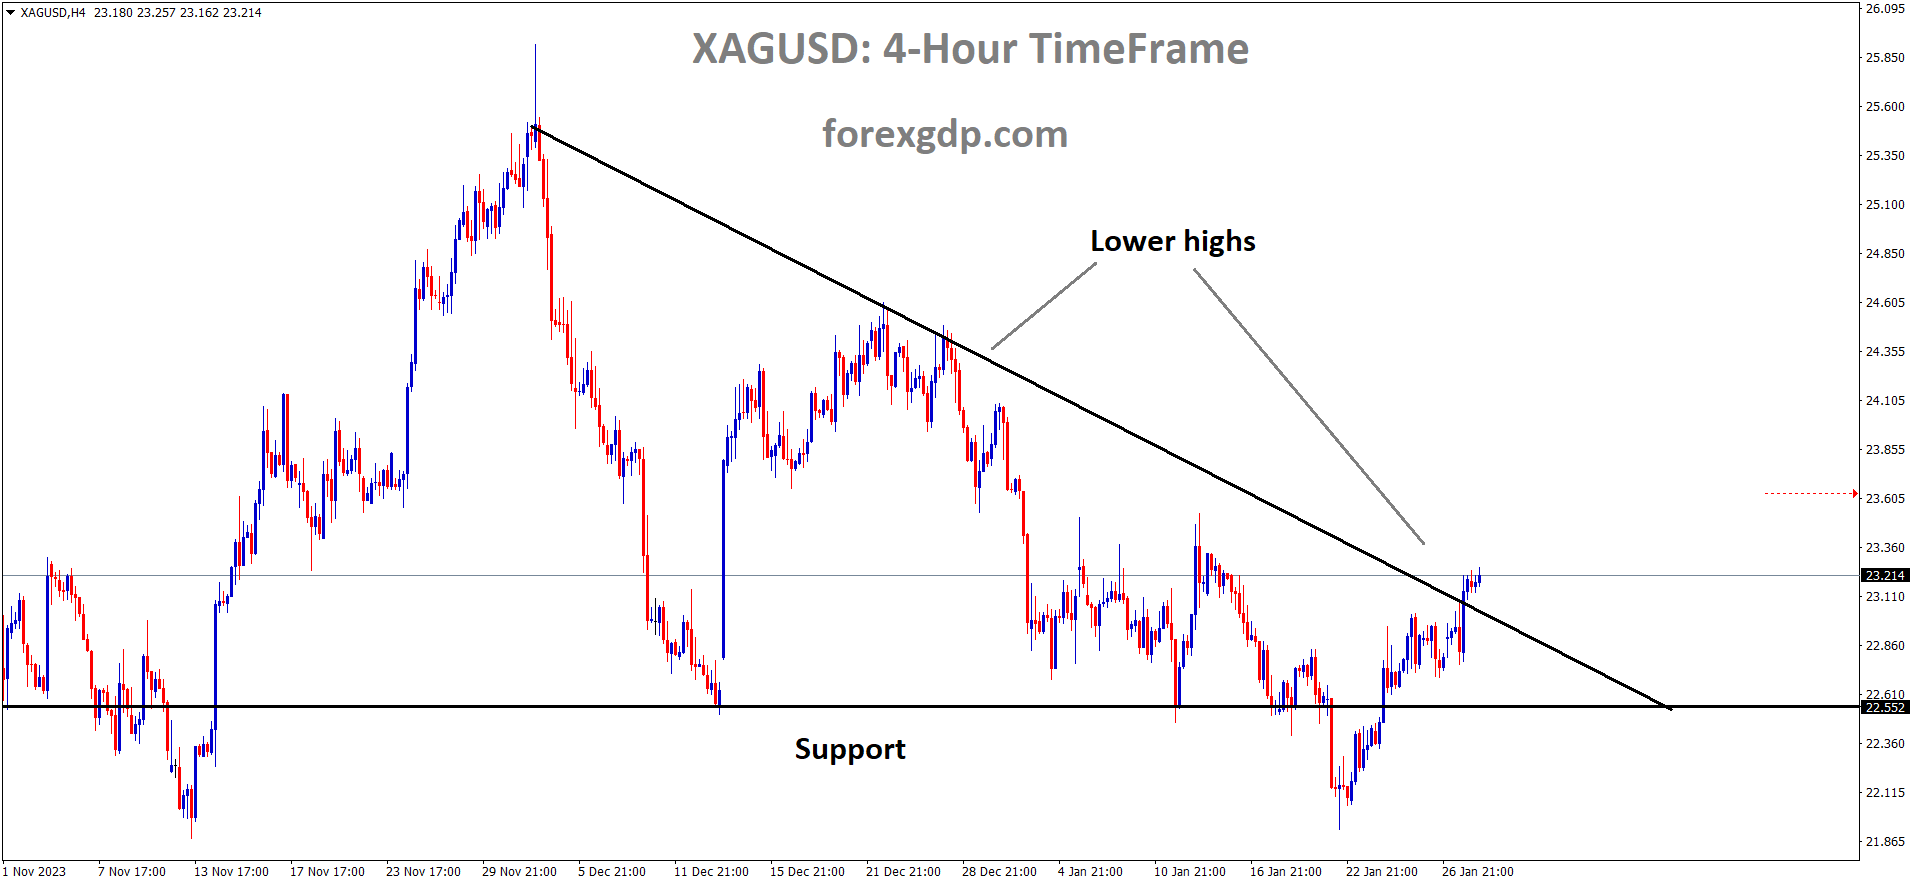 XAGUSD Silver price is moving in the Descending triangle pattern and the market has reached the lower high area of the pattern